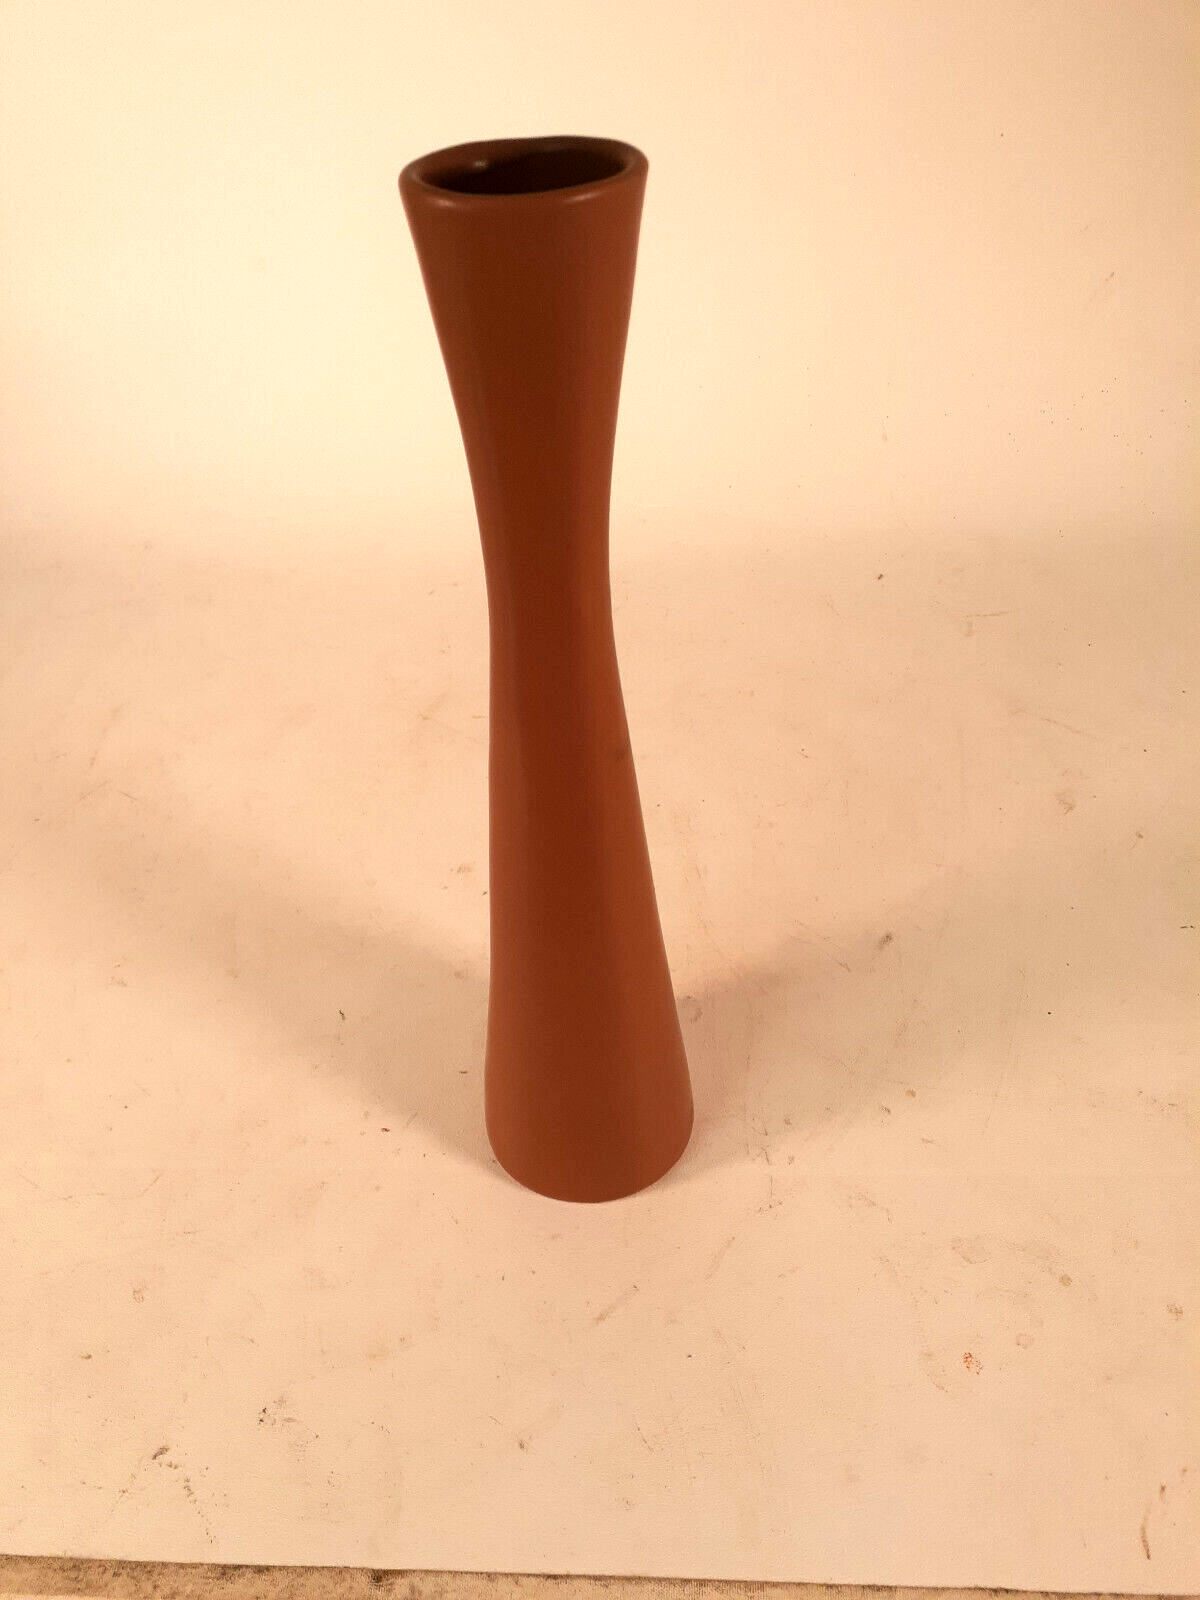 Primary image for Van Briggle Mid Century Modern Vase, Matte Brown Glaze, 11.5 Inches Tall